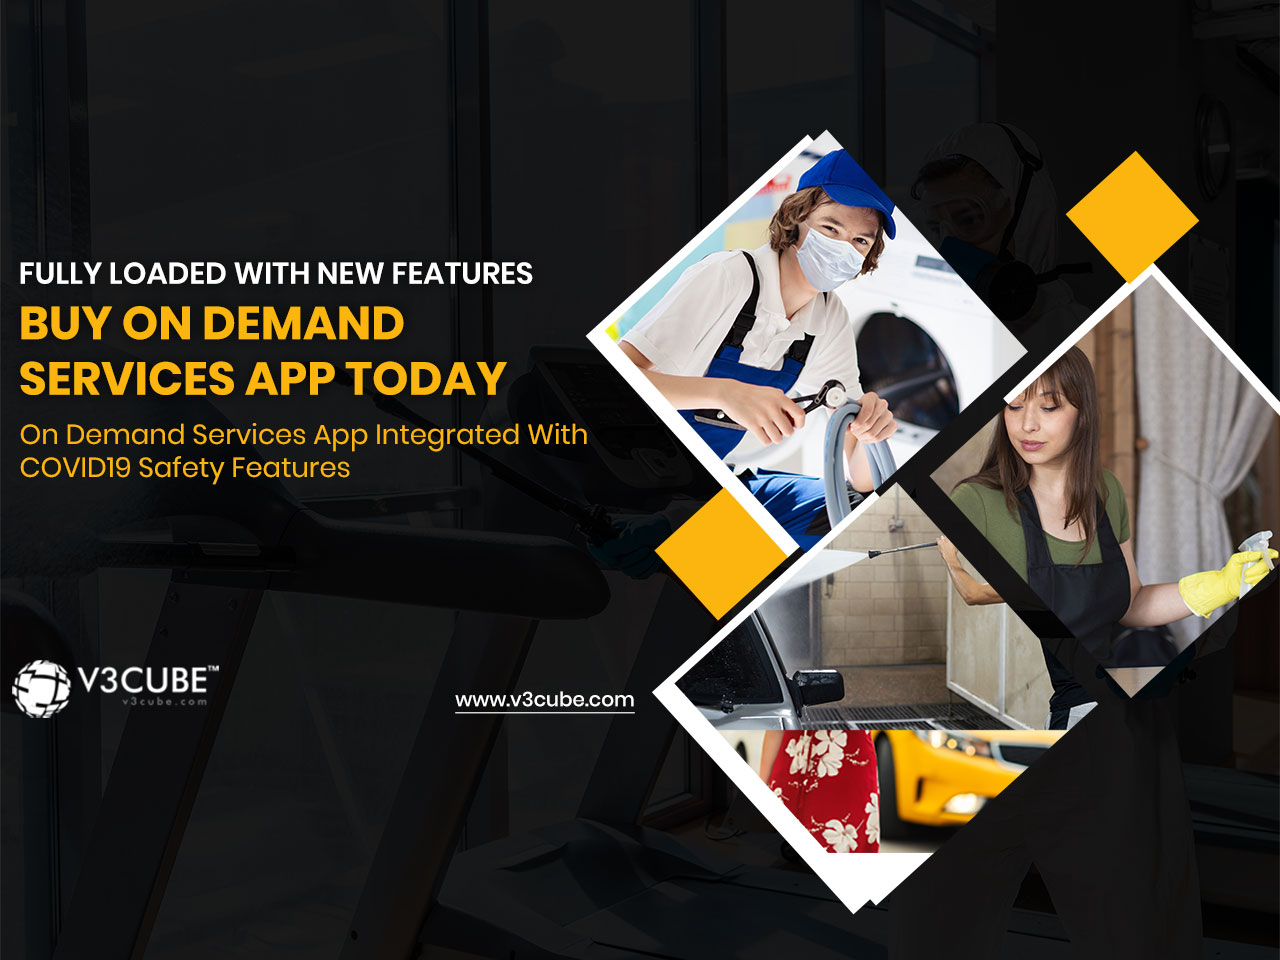 On Demand Services App Integrated With COVID19 Safety Features